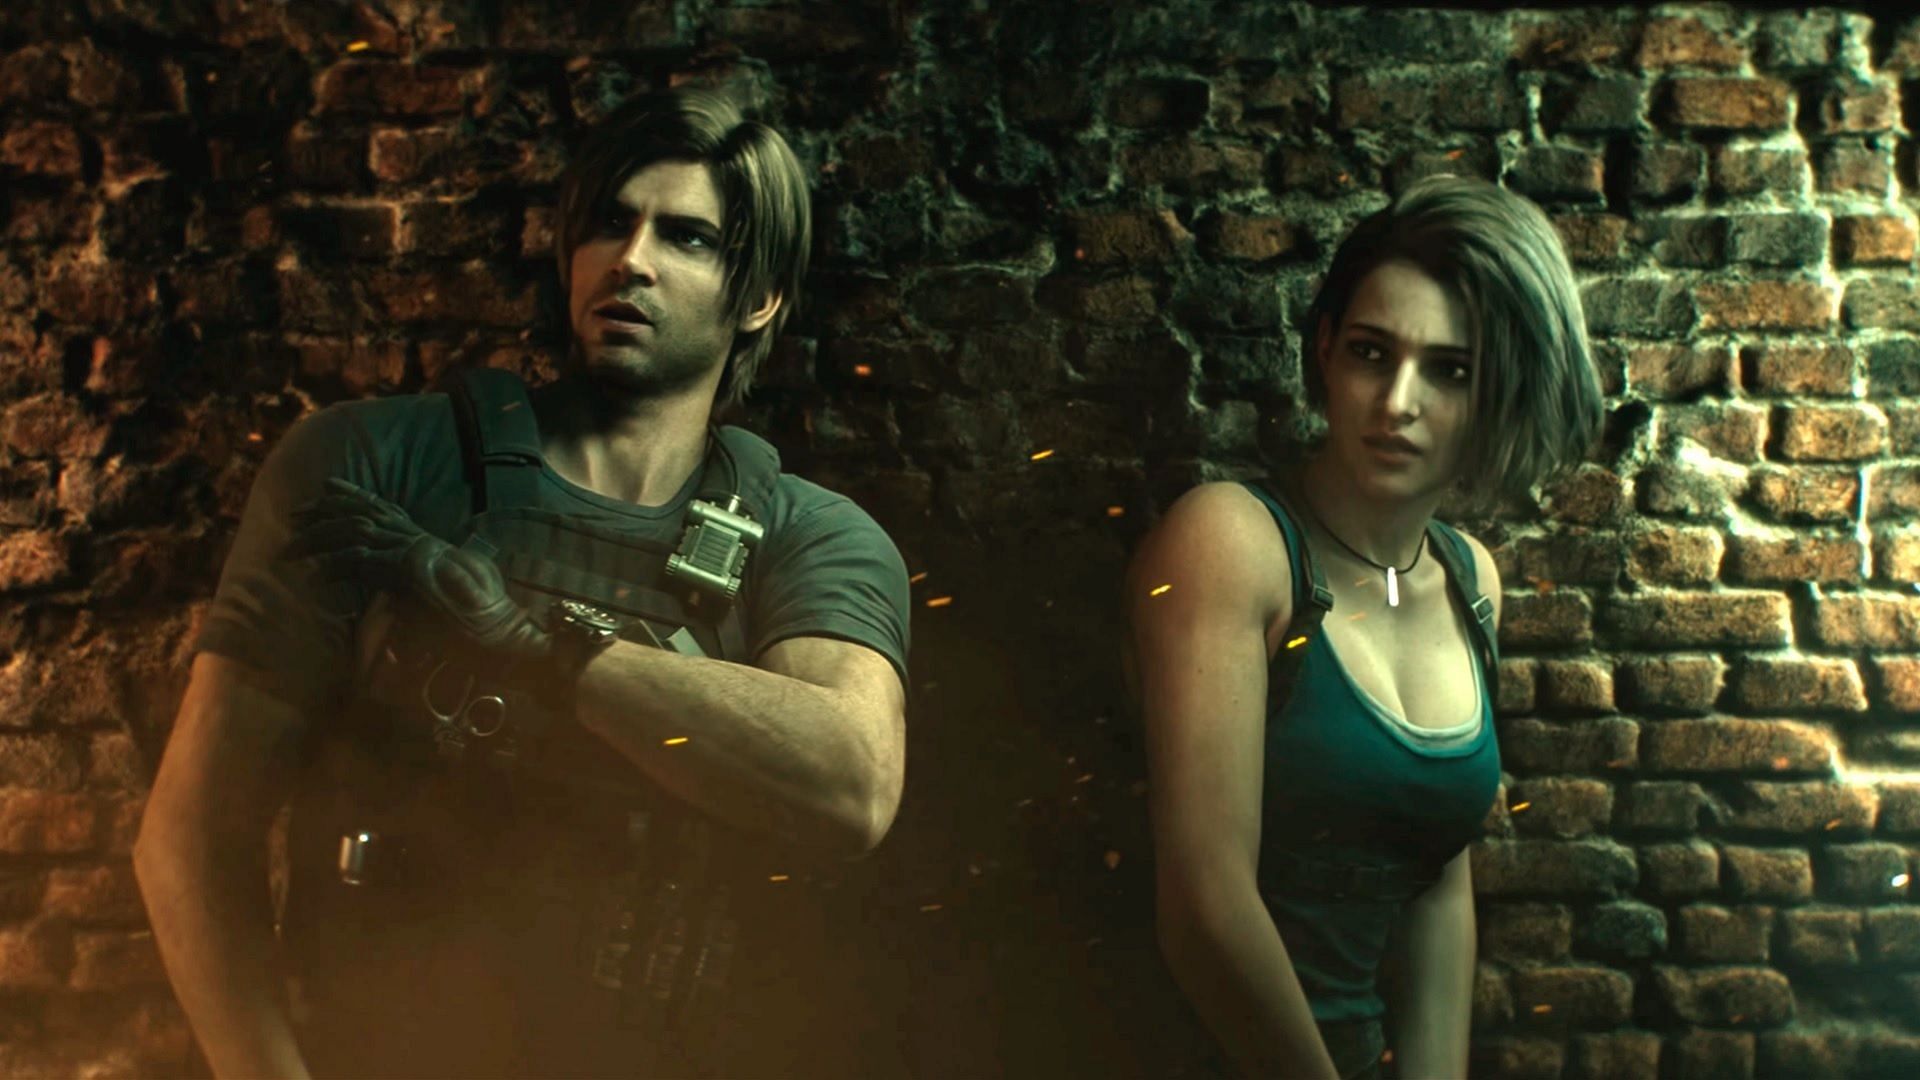 Resident Evil 9 is rumored to bring back the iconic co-op gameplay mode seen in past installments by Capcom